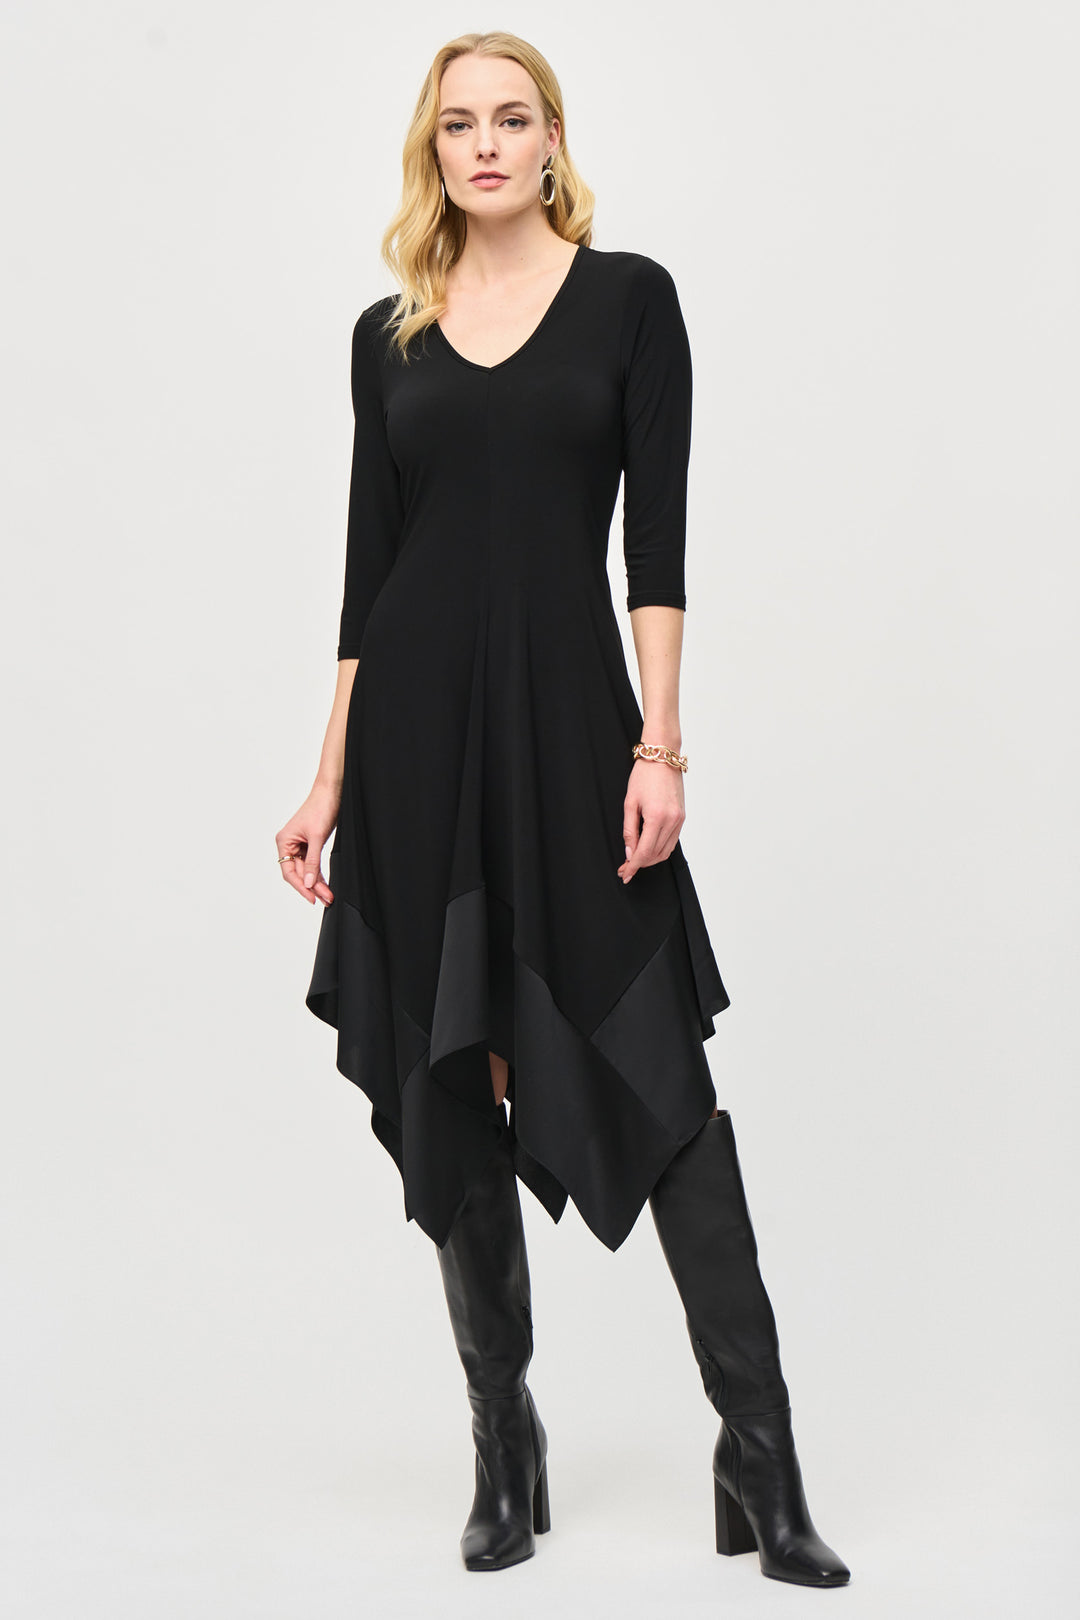 Joseph Ribkoff Fall 2024 The open neck style and 3/4 sleeves add a touch of elegance. The lovely handkerchief hem completes the ensemble for a chic and memorable outfit.